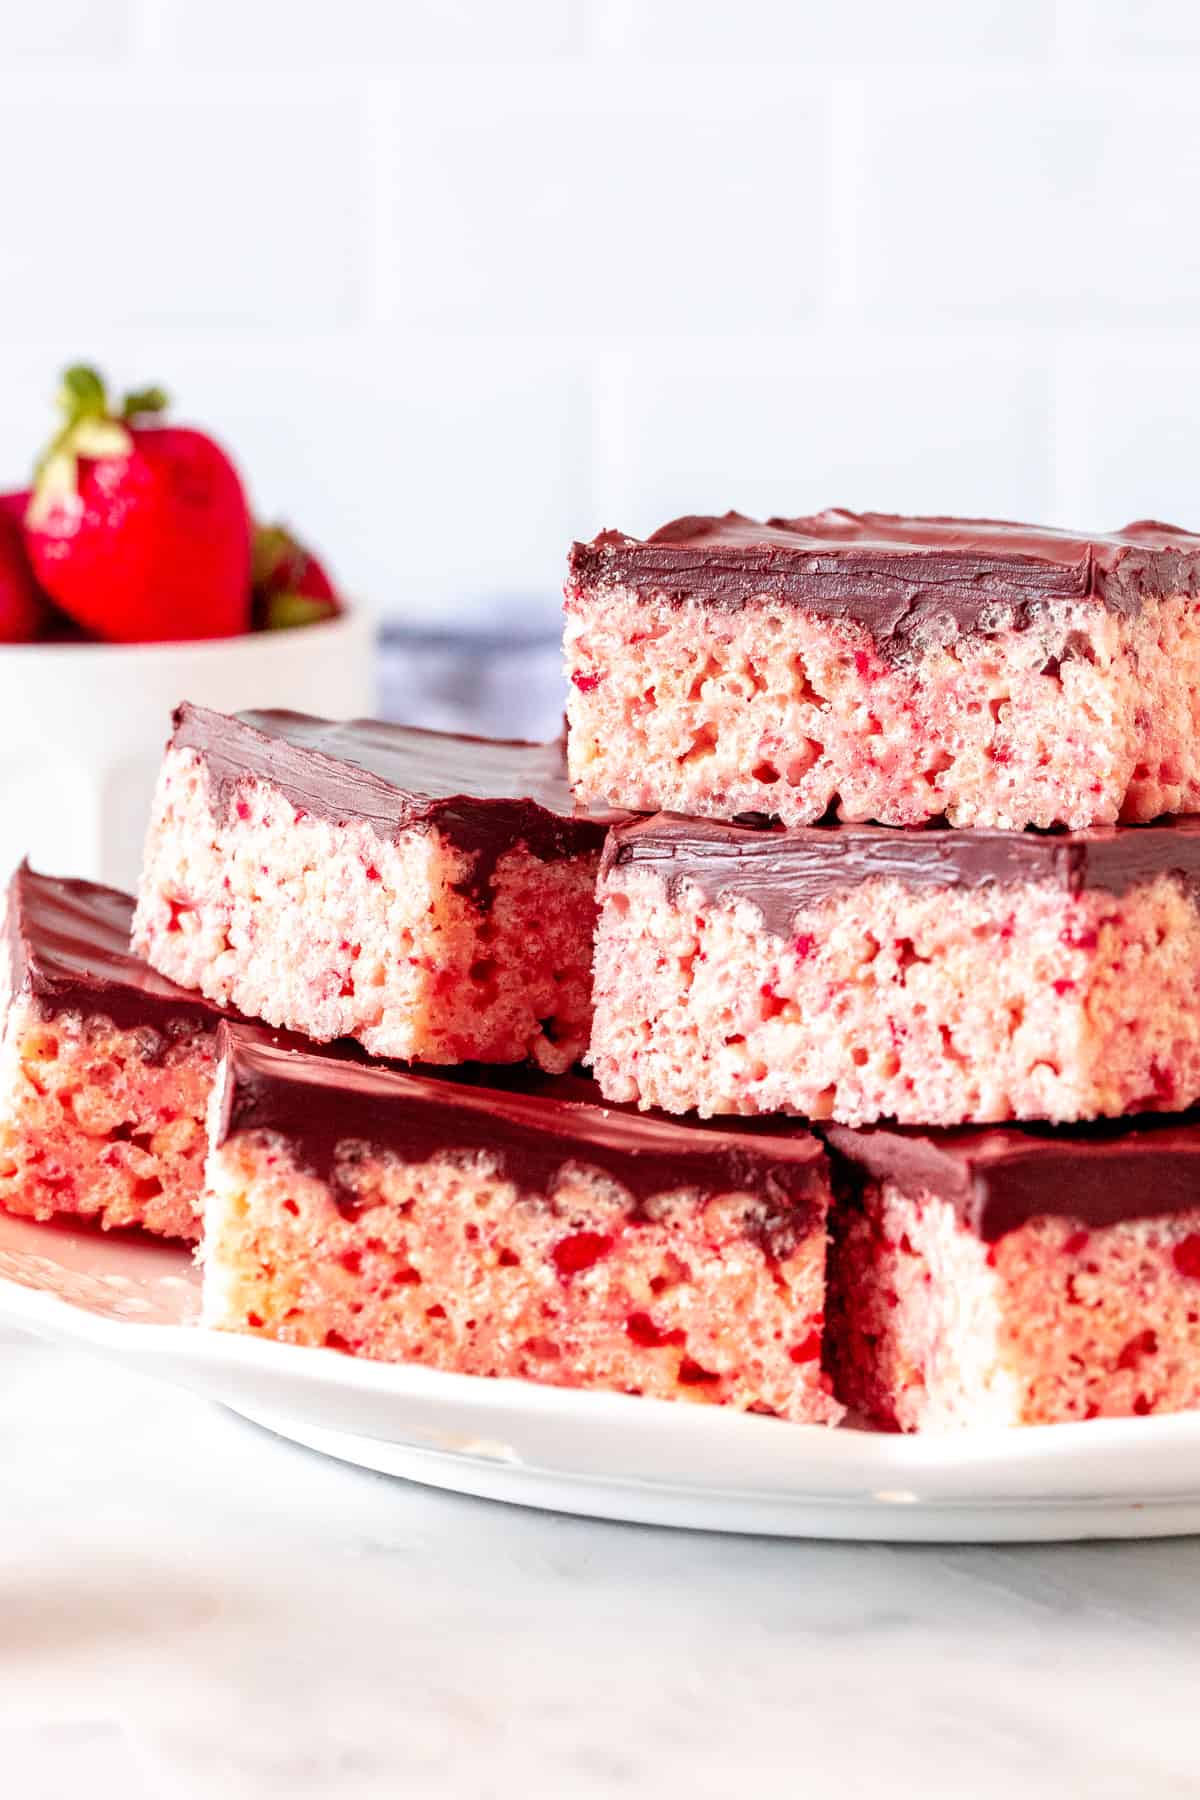 Plate of strawberry cereal treats with chocolate topping